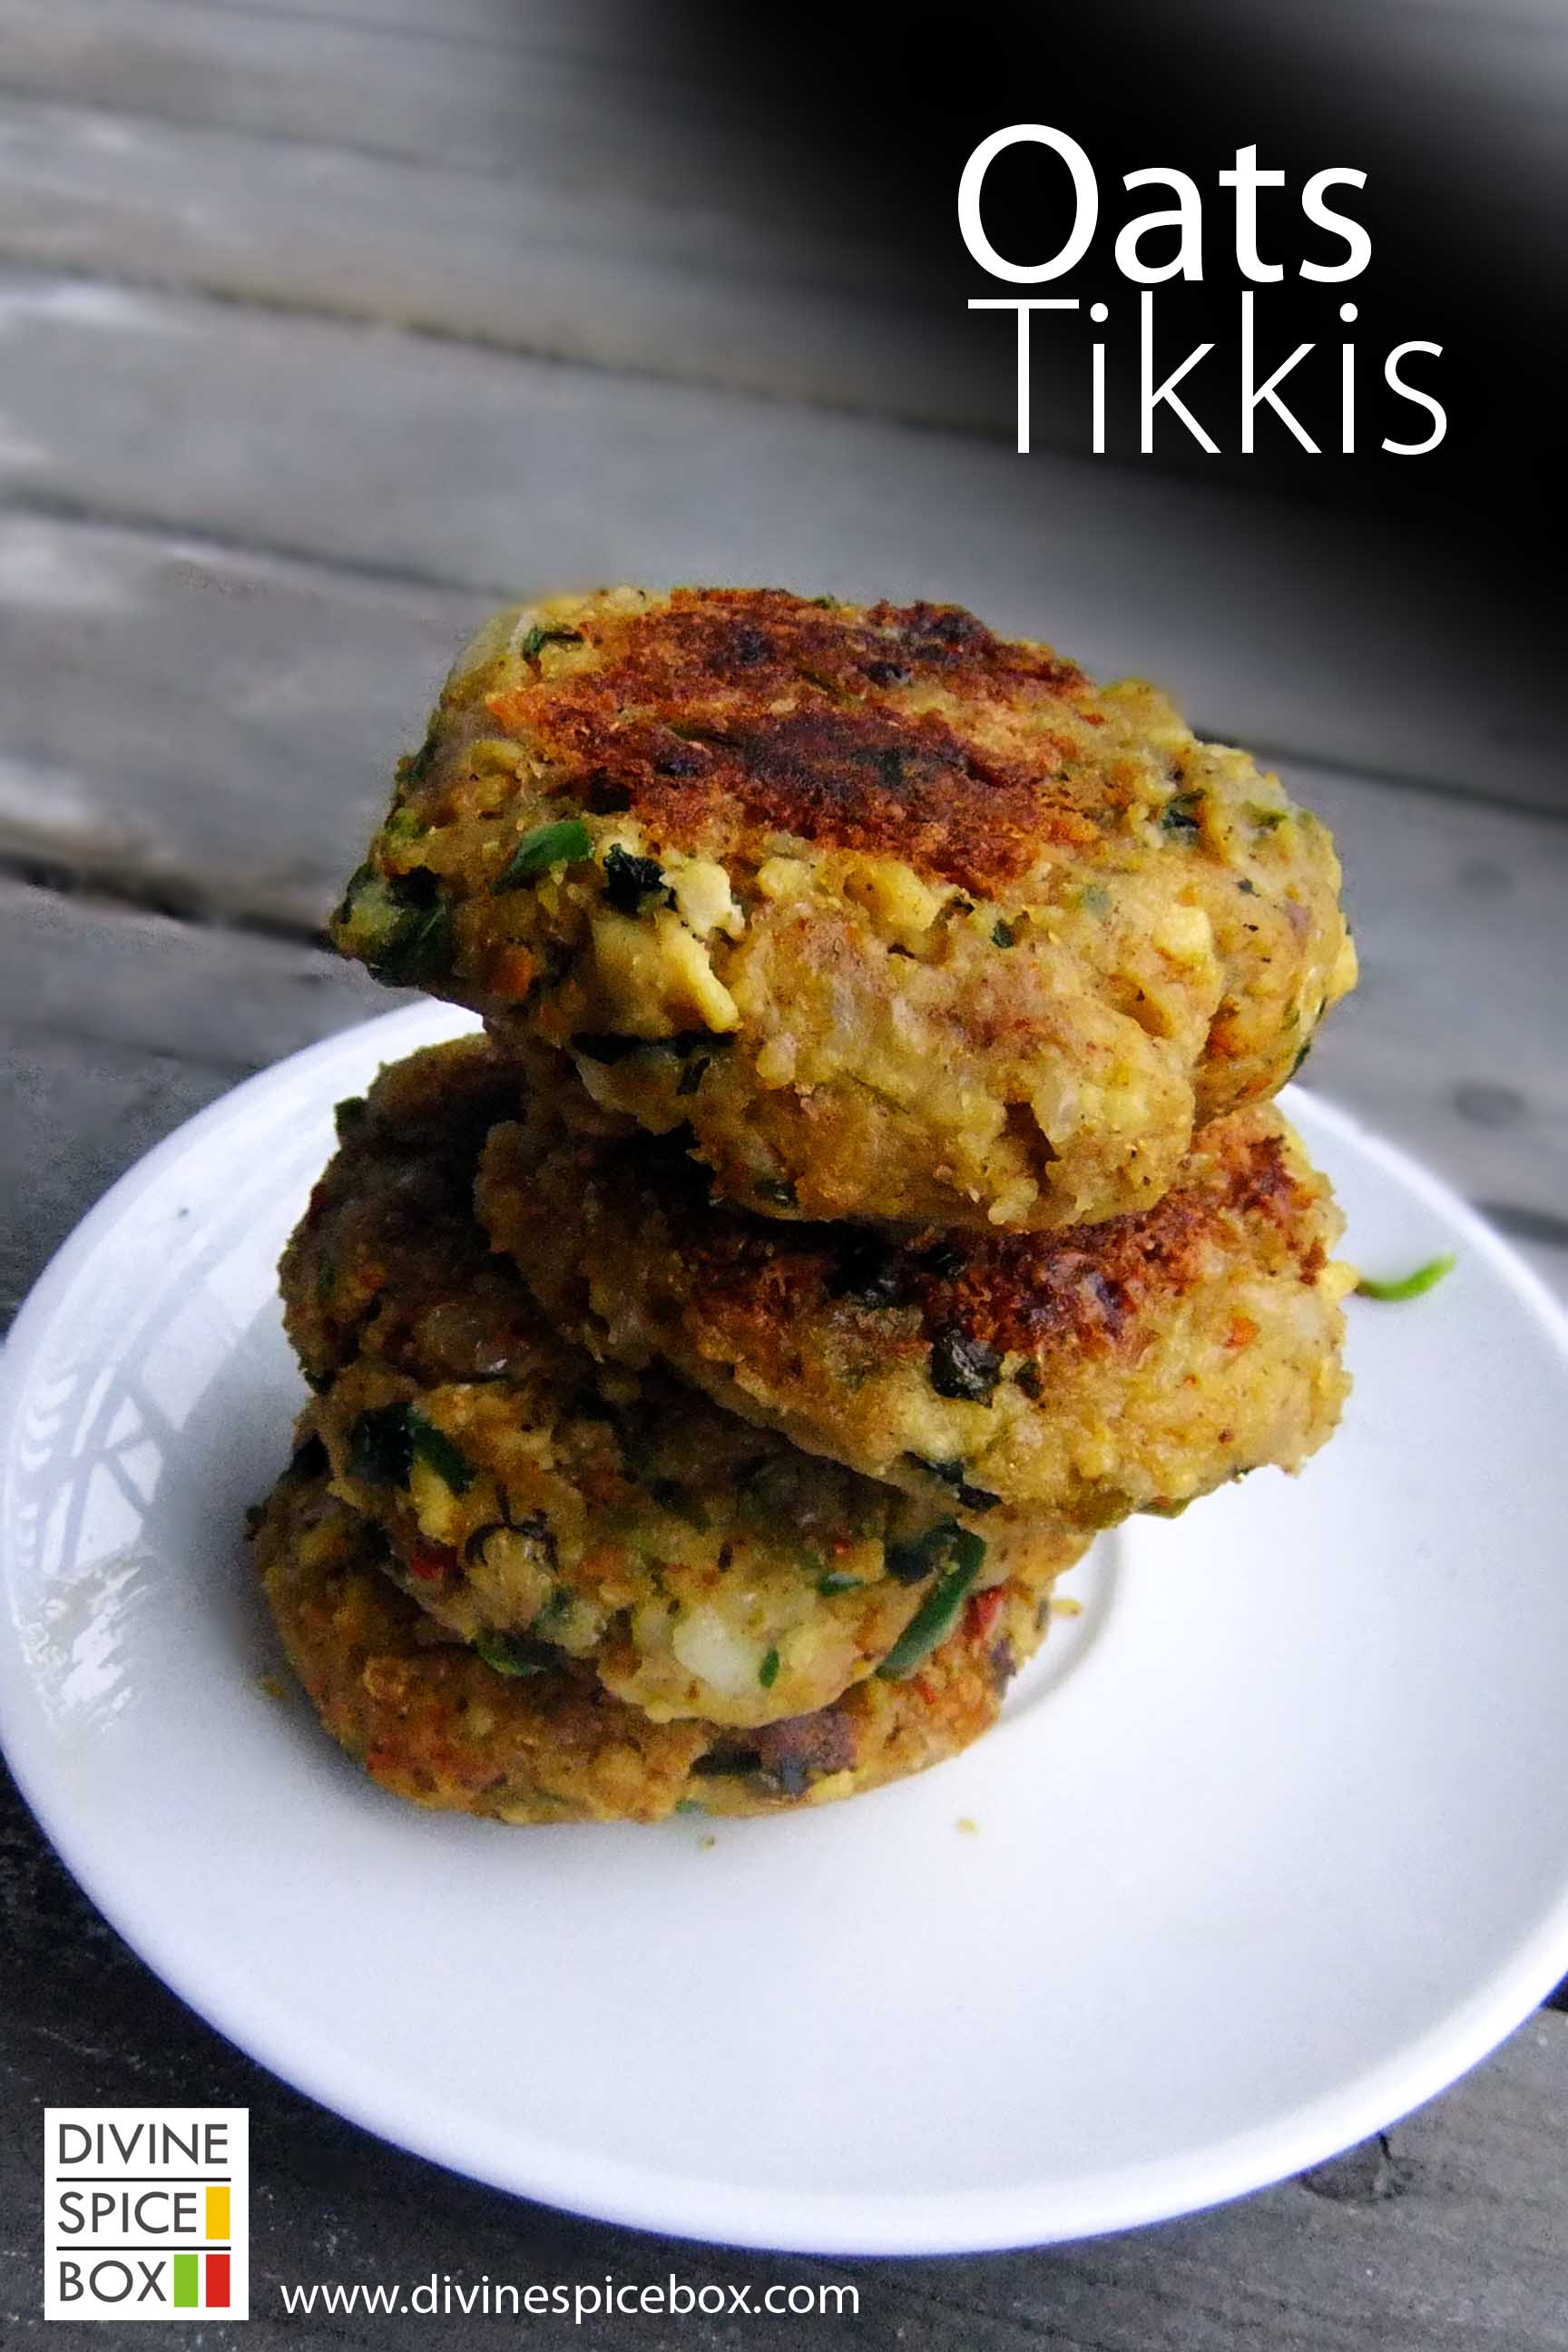 Foodista | Recipes, Cooking Tips, and Food News | Oats Tikkis